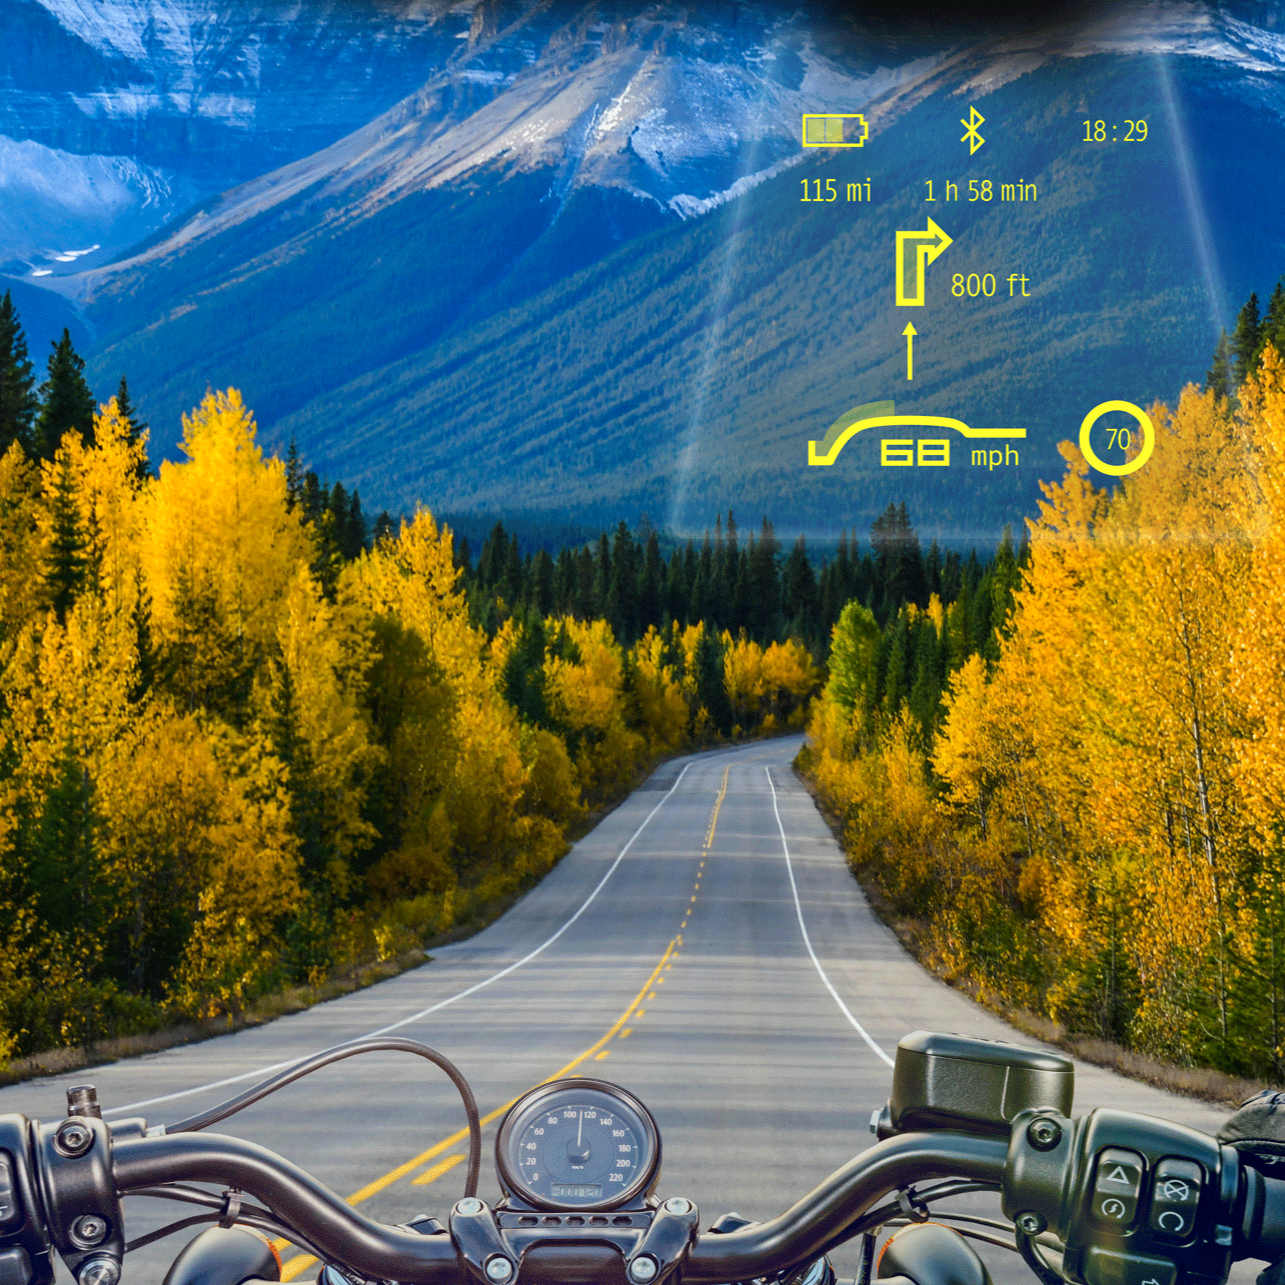 At Tilsberk Head-up Display  for your motorcycle helmet, you can choose which units of measurement are displayed, in this example: mph as well as mi and ft